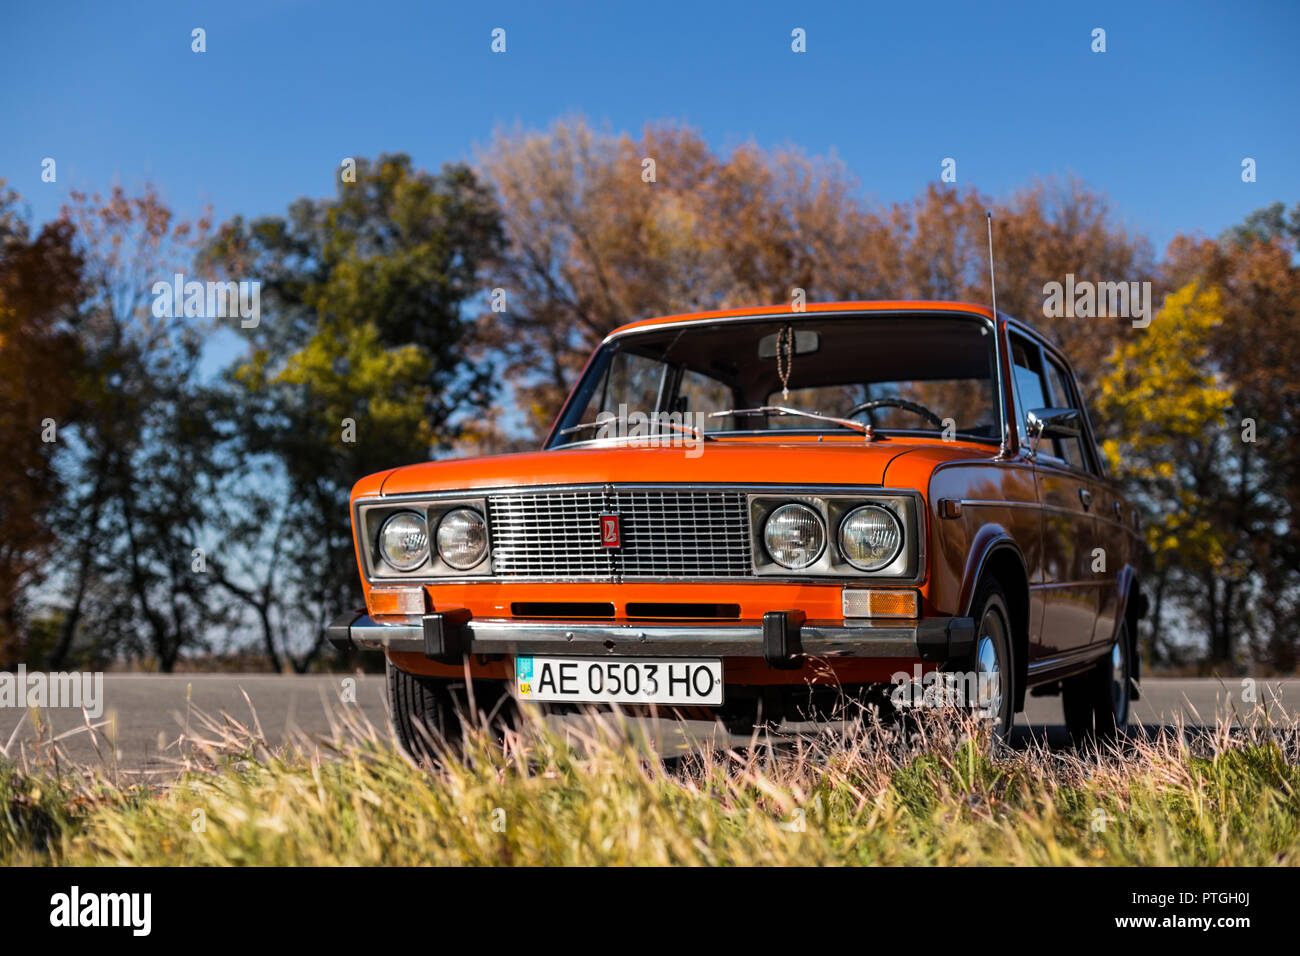 PERESHCHEPINO, UKRAINE - OCTOBER 12, 2014: Zhiguli VAZ 2106 original orange, released in the USSR in 70's. Car parked on the side of the road in the m Stock Photo